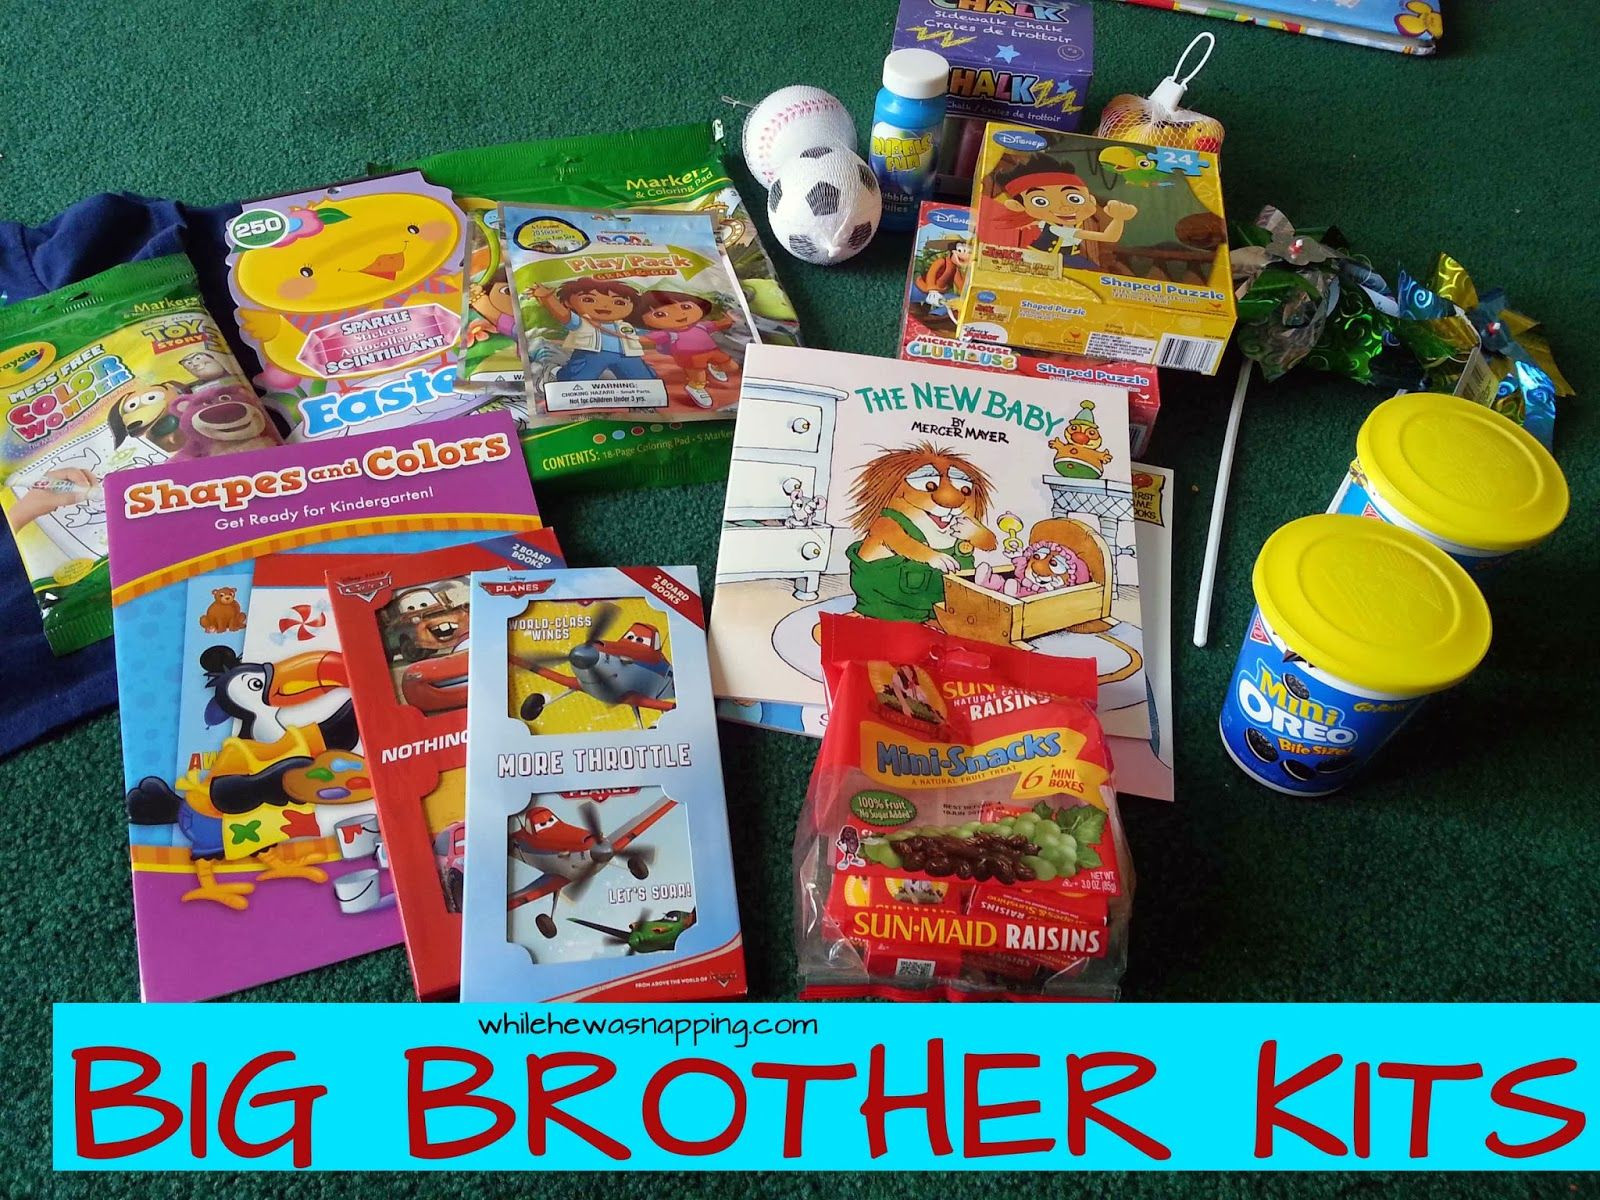 Gifts From New Baby To Big Brother
 Big Sibling Kits From the Baby